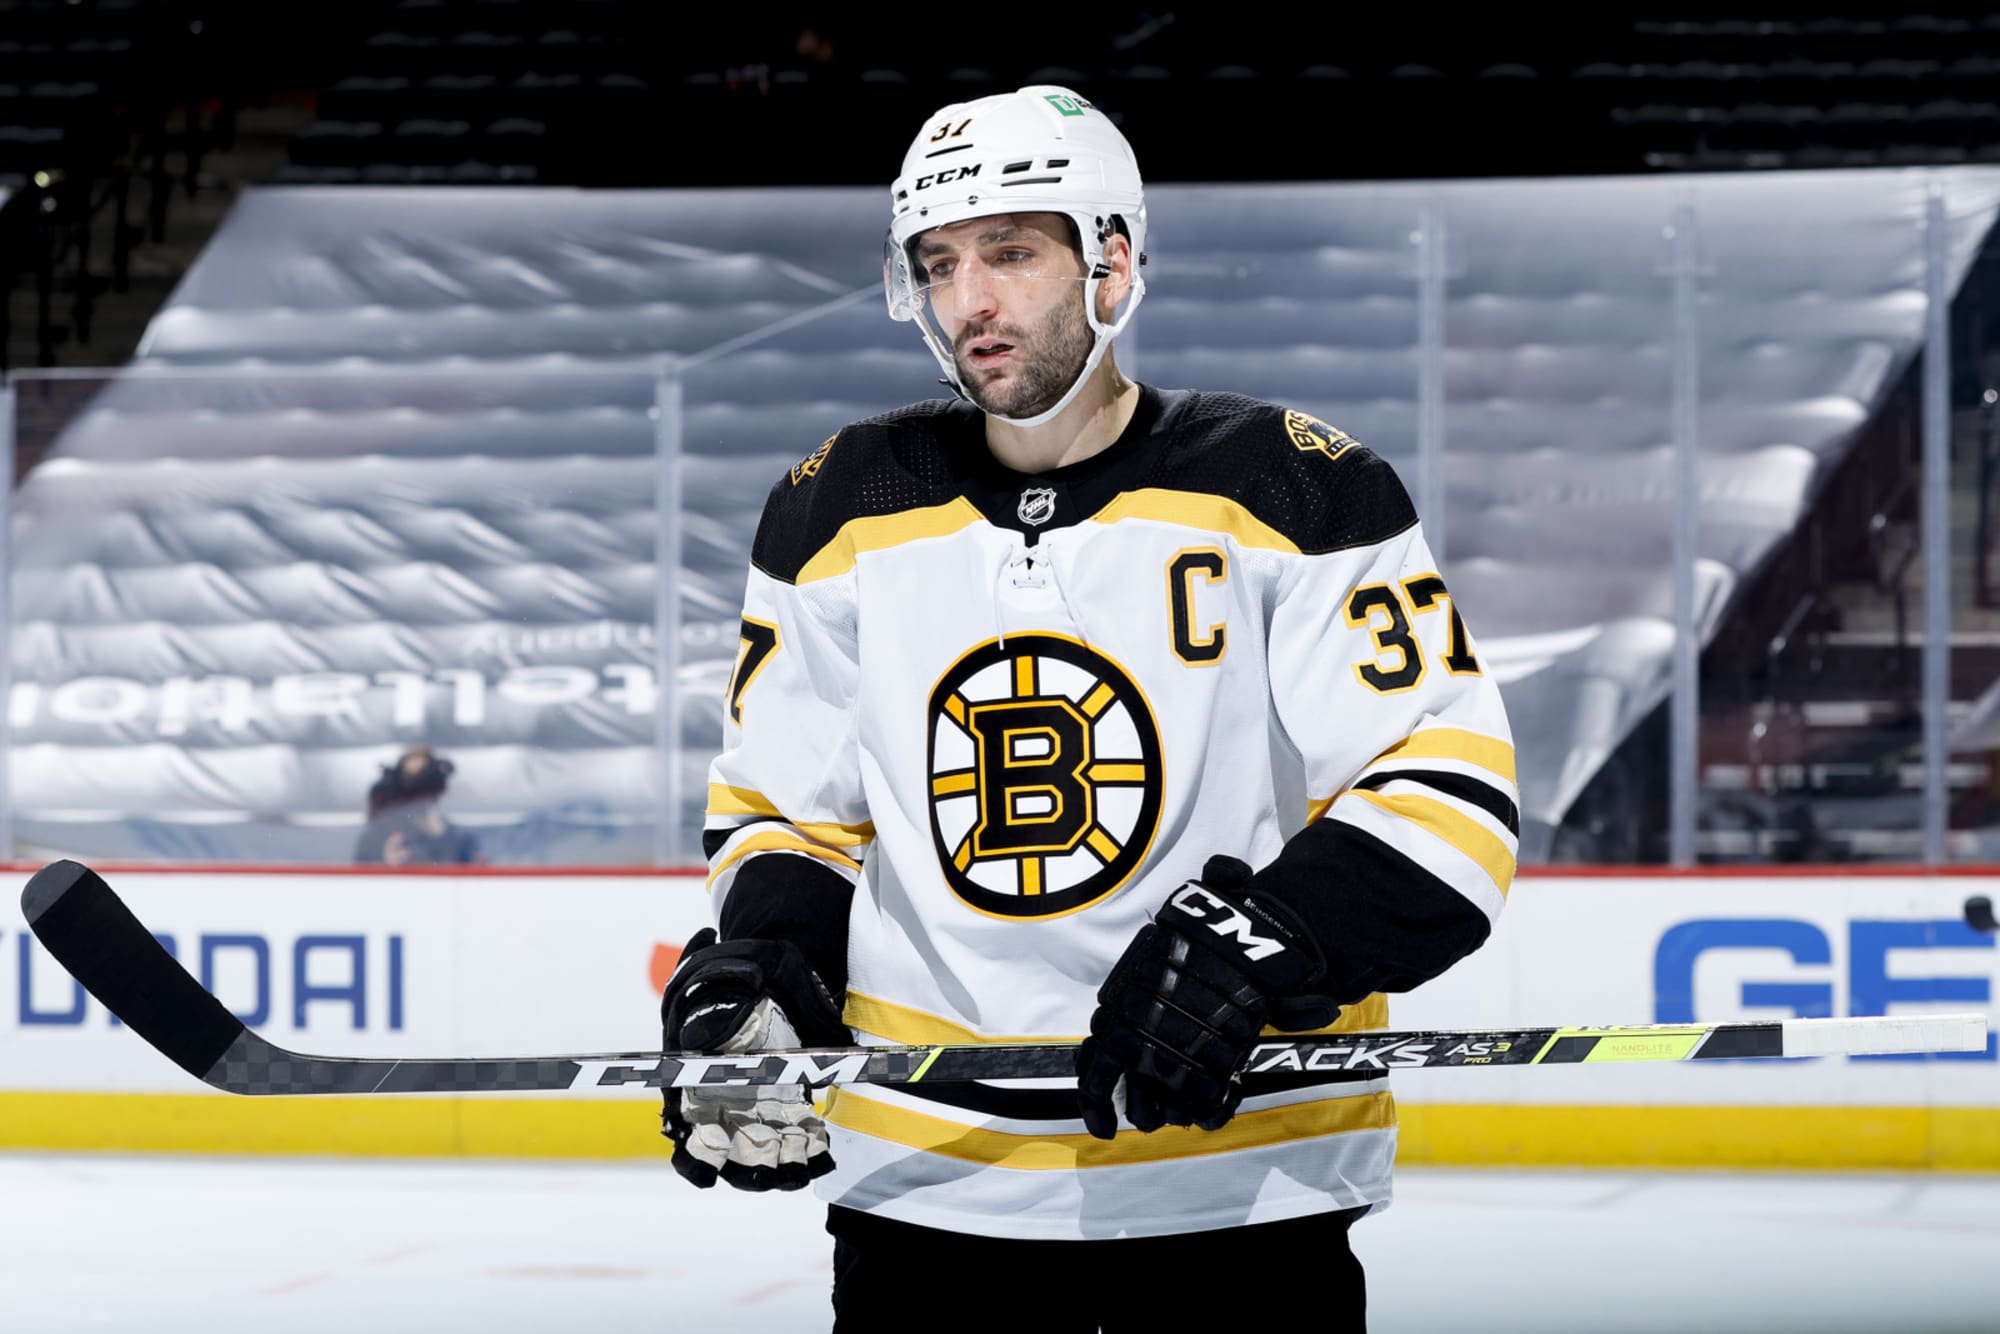 Boston Bruins Awards Watch Patrice Bergeron on pace for another Selke